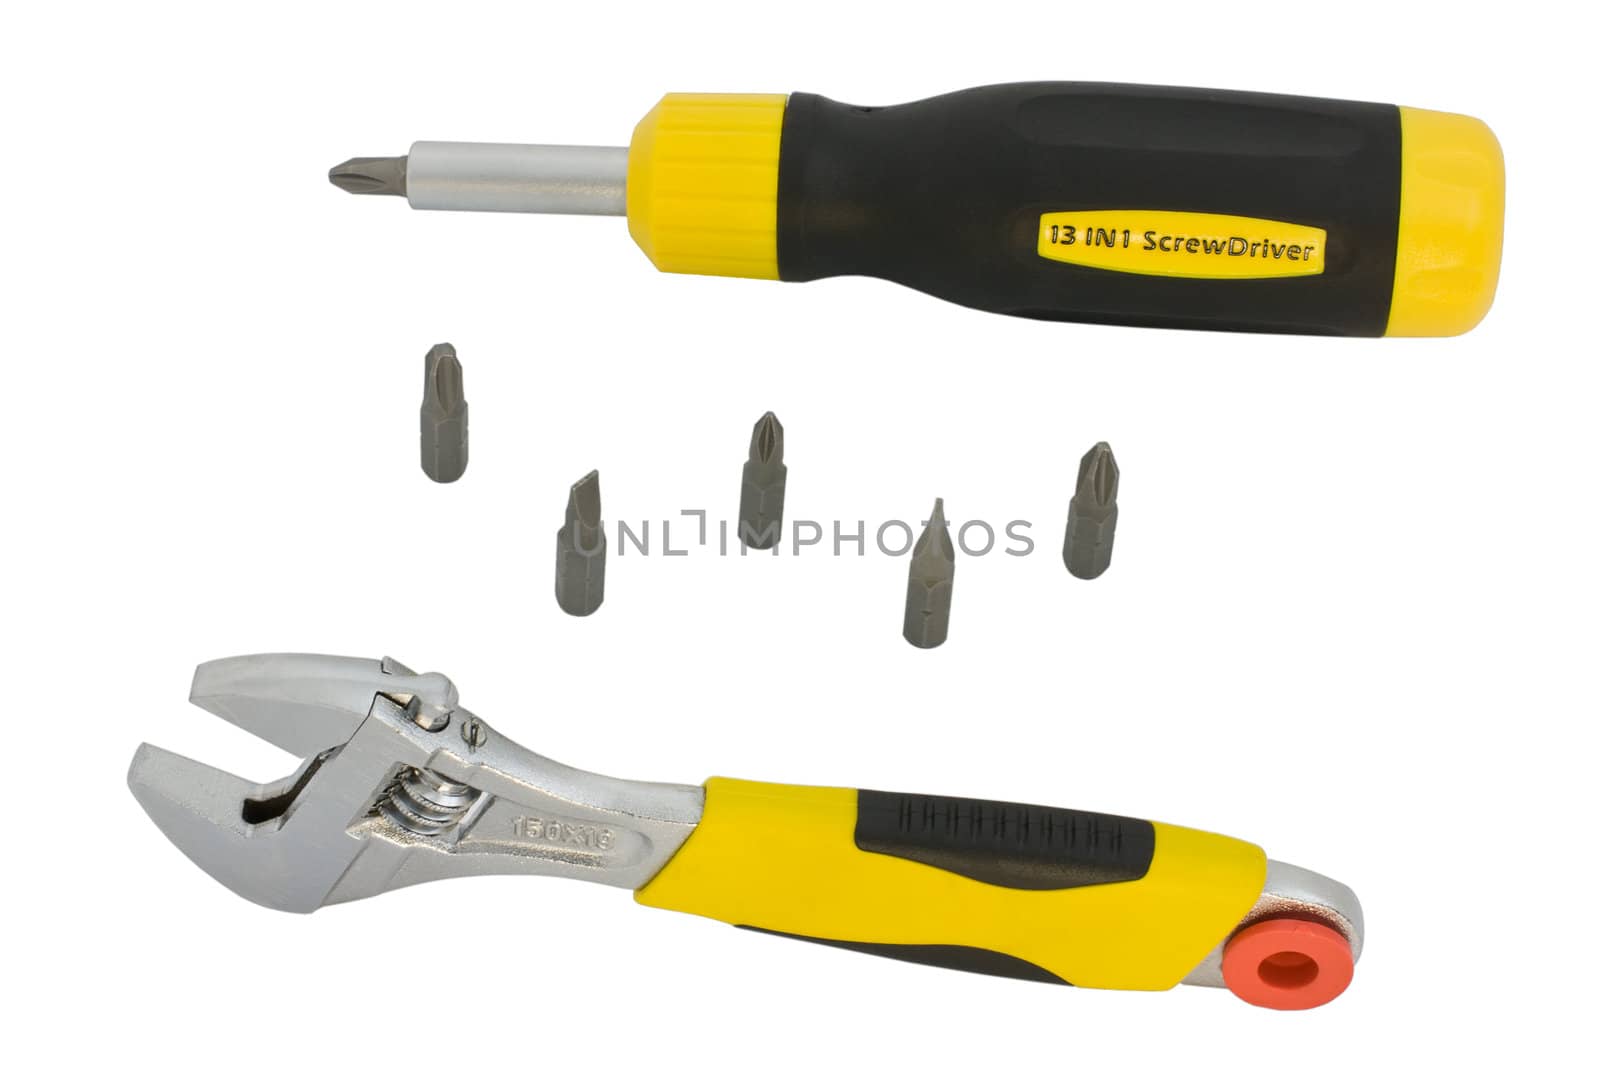 Screwdriver and adjustable wrench by rozhenyuk